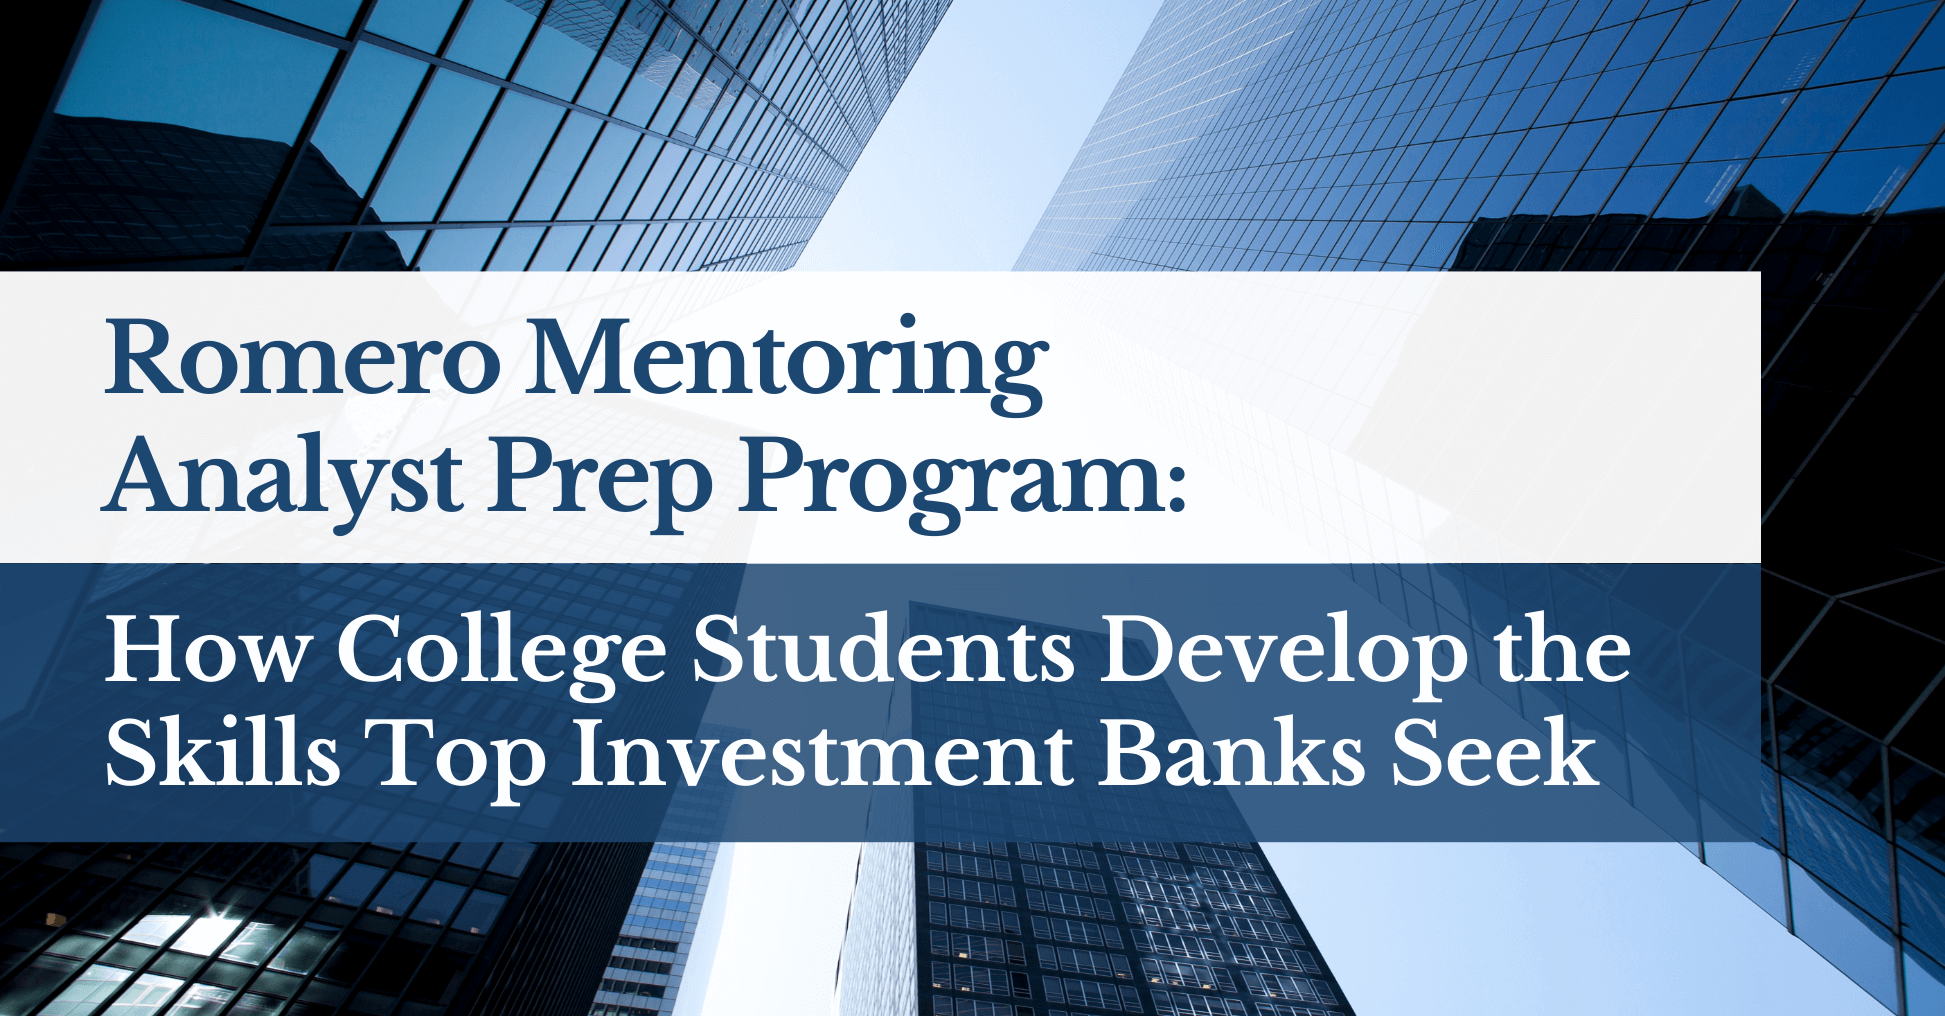 Romero Mentoring Analyst Prep Program: How College Students Develop the Skills Top Investment Banks Seek